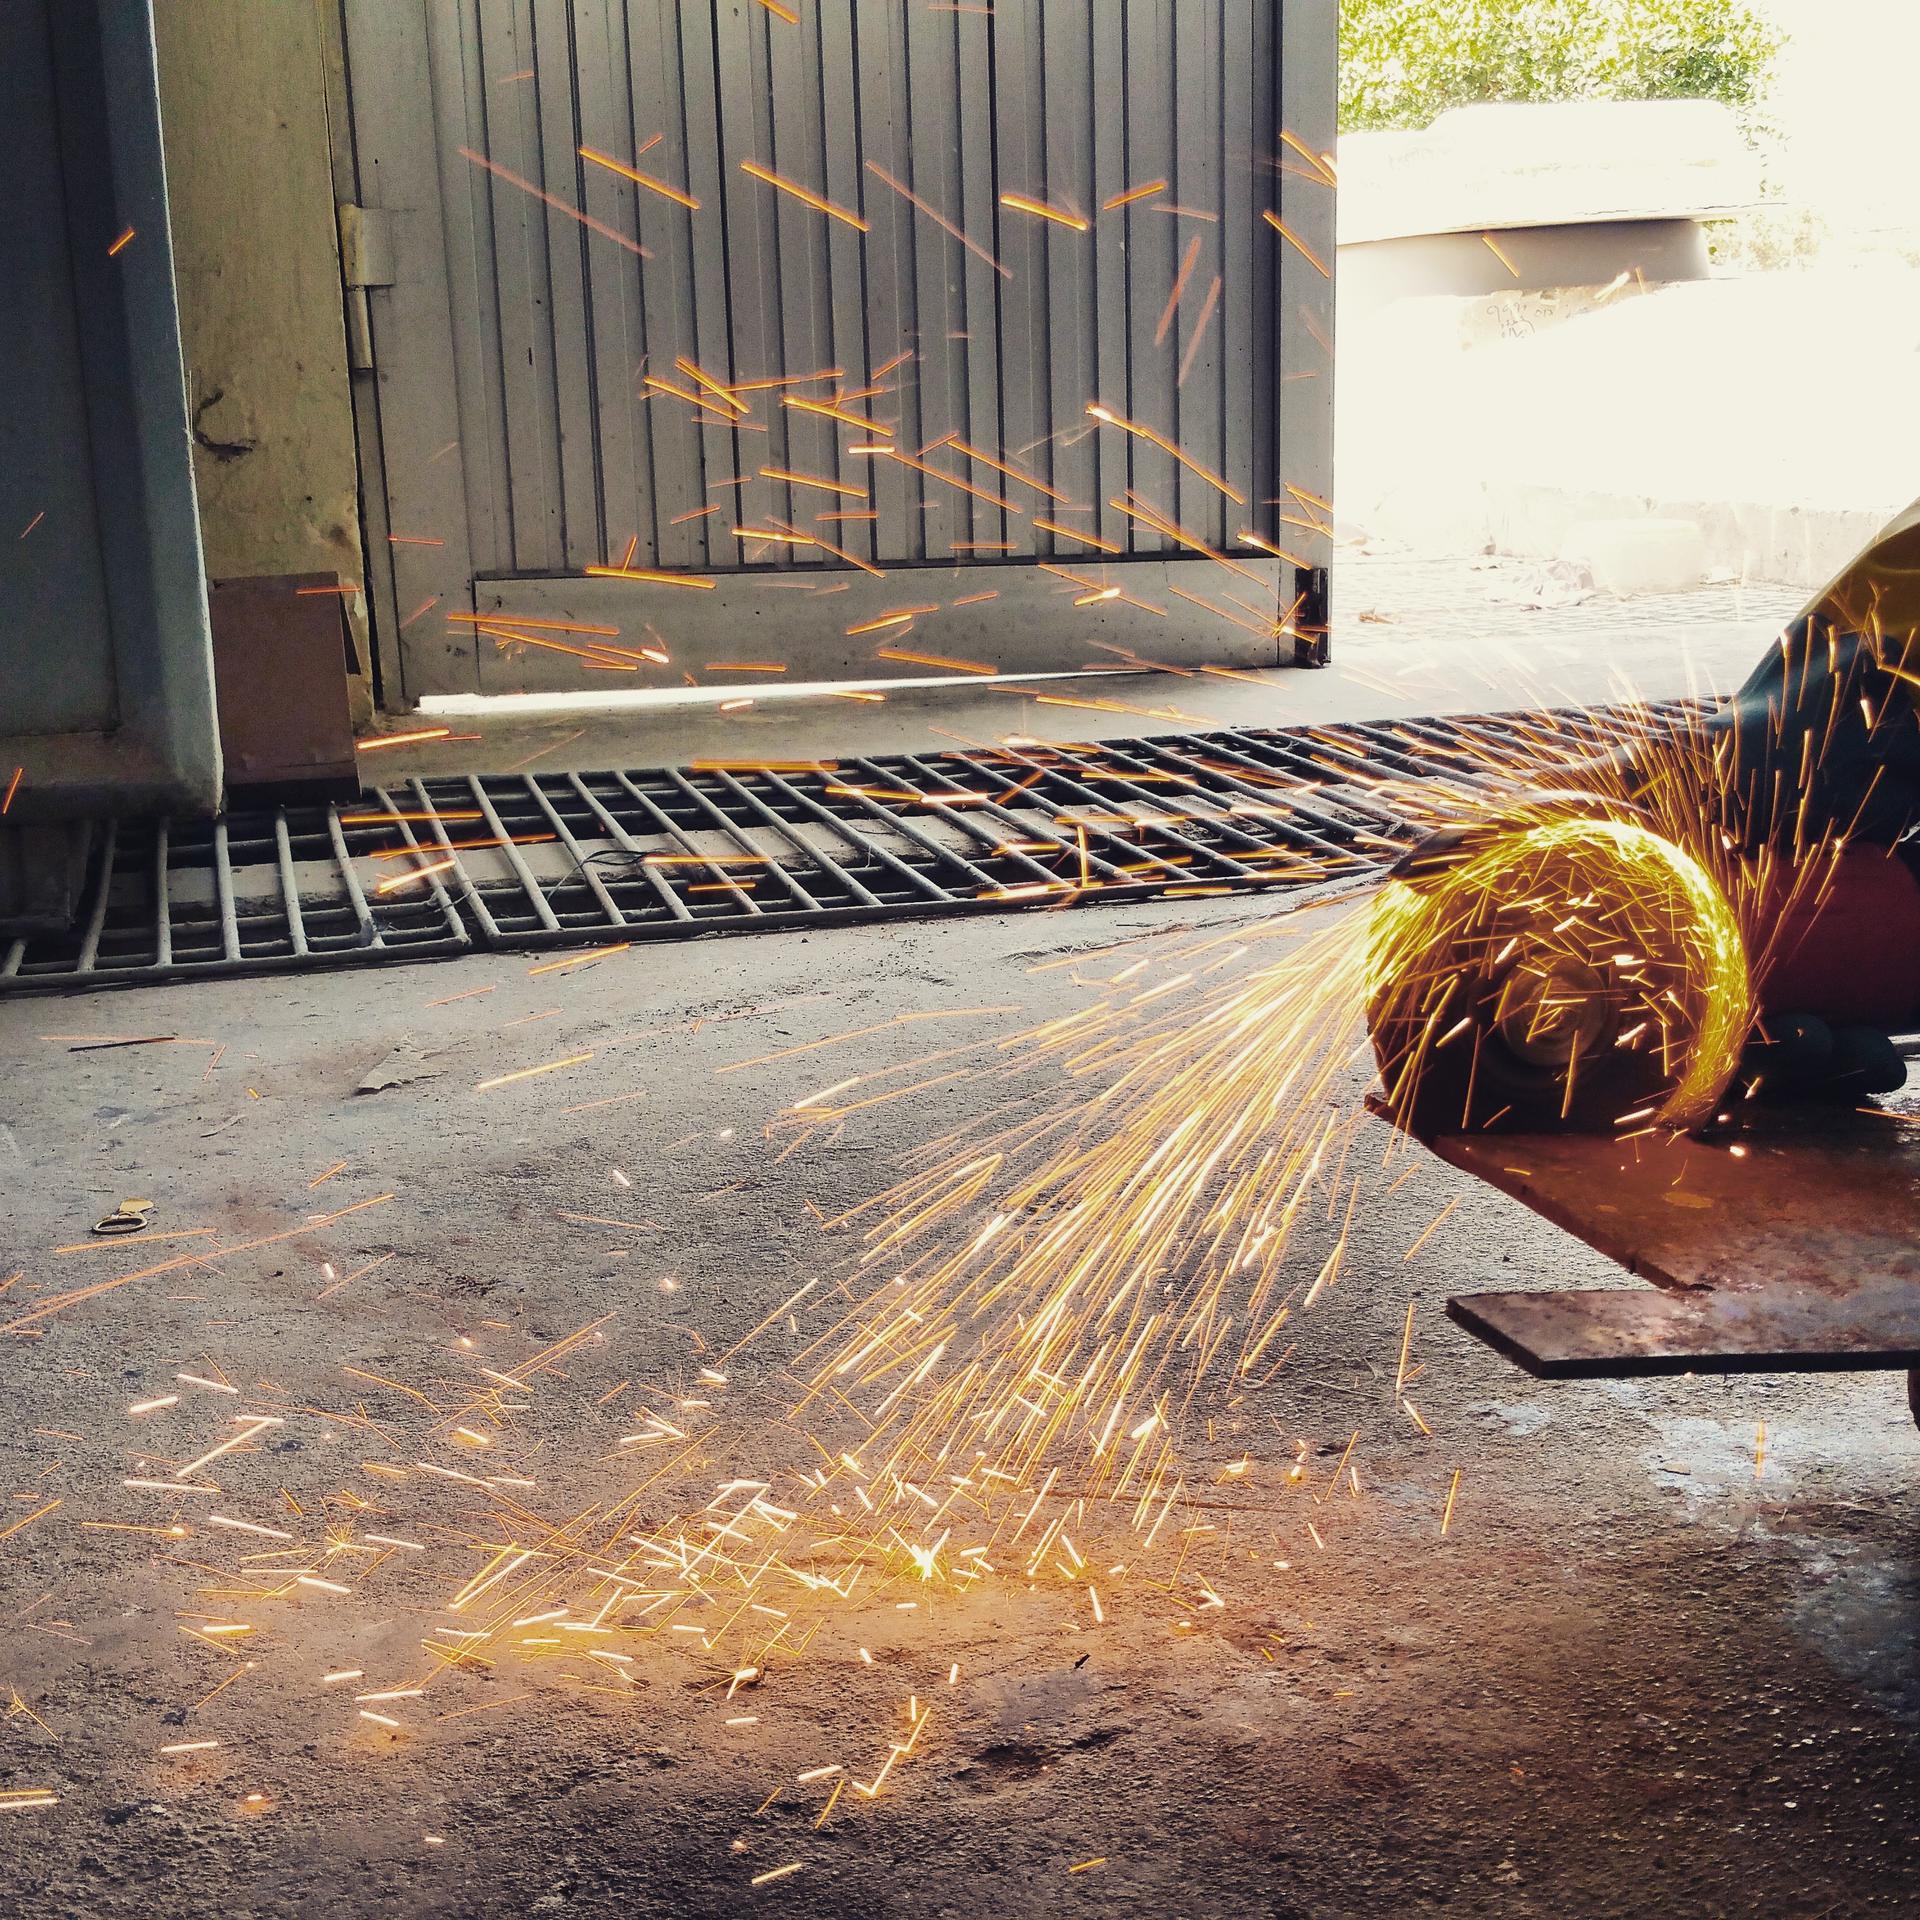 A metal sheet being cut by an angle grinder portraying the element of learning by doing.